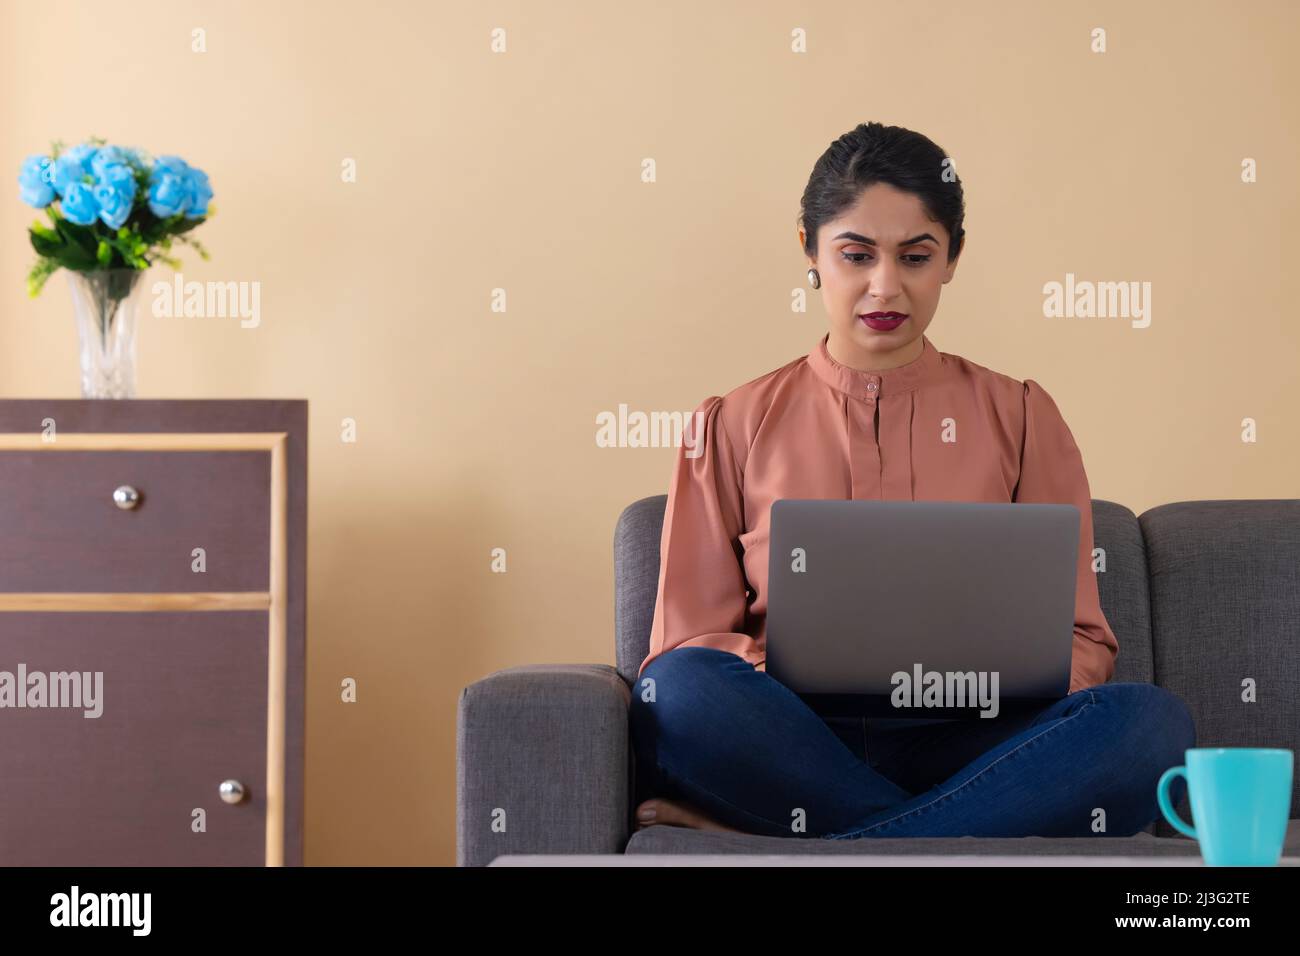 Indian woman working from home using laptop Stock Photo